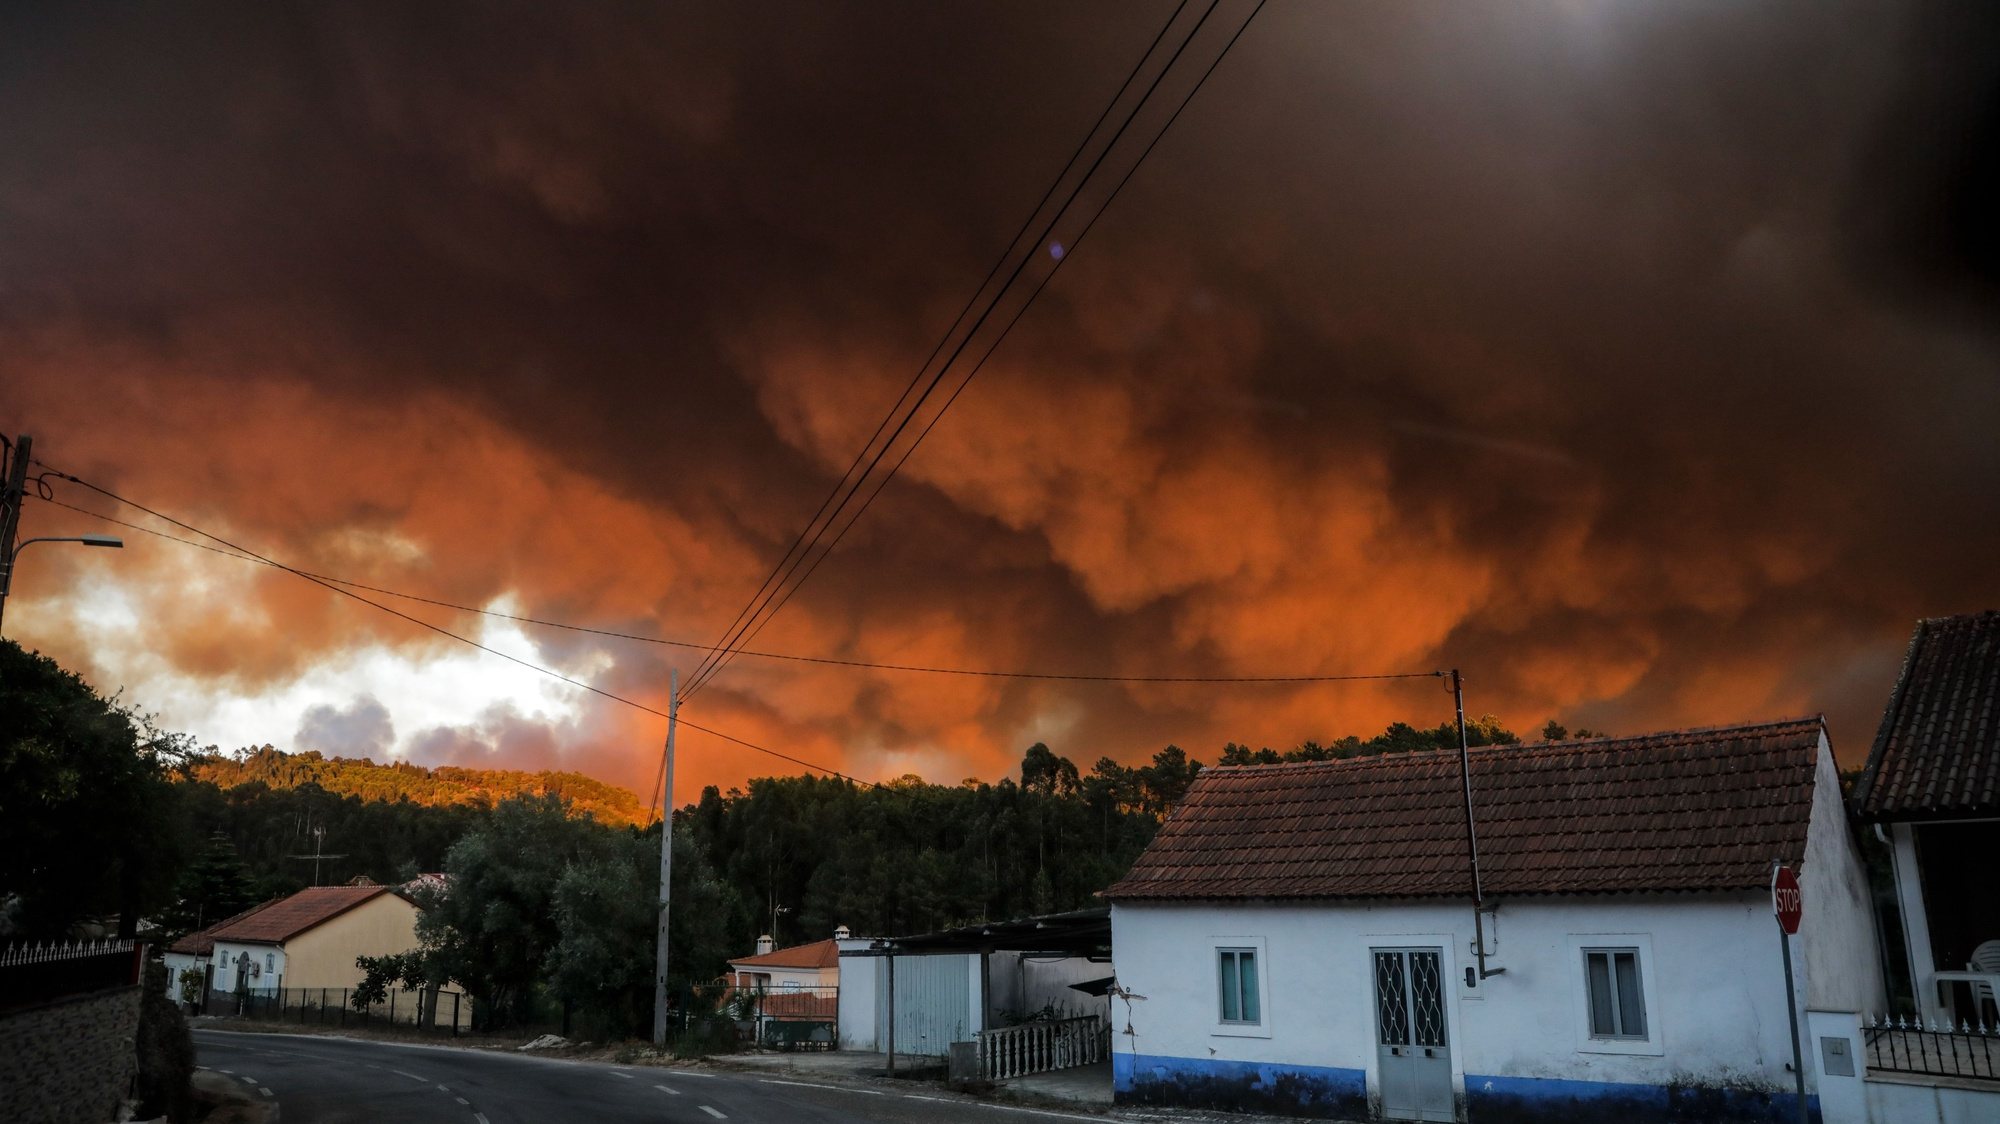 The sky covered with smoke due to a forest fire in the village of Urqueira, Ourem, Portugal, 19 August 2022. At least 50 people were taken out of their homes today, as a precaution, due to the fire that has been raging since 2:40 pm in the municipality of Ourem, district of Santarem. PAULO CUNHA/LUSA